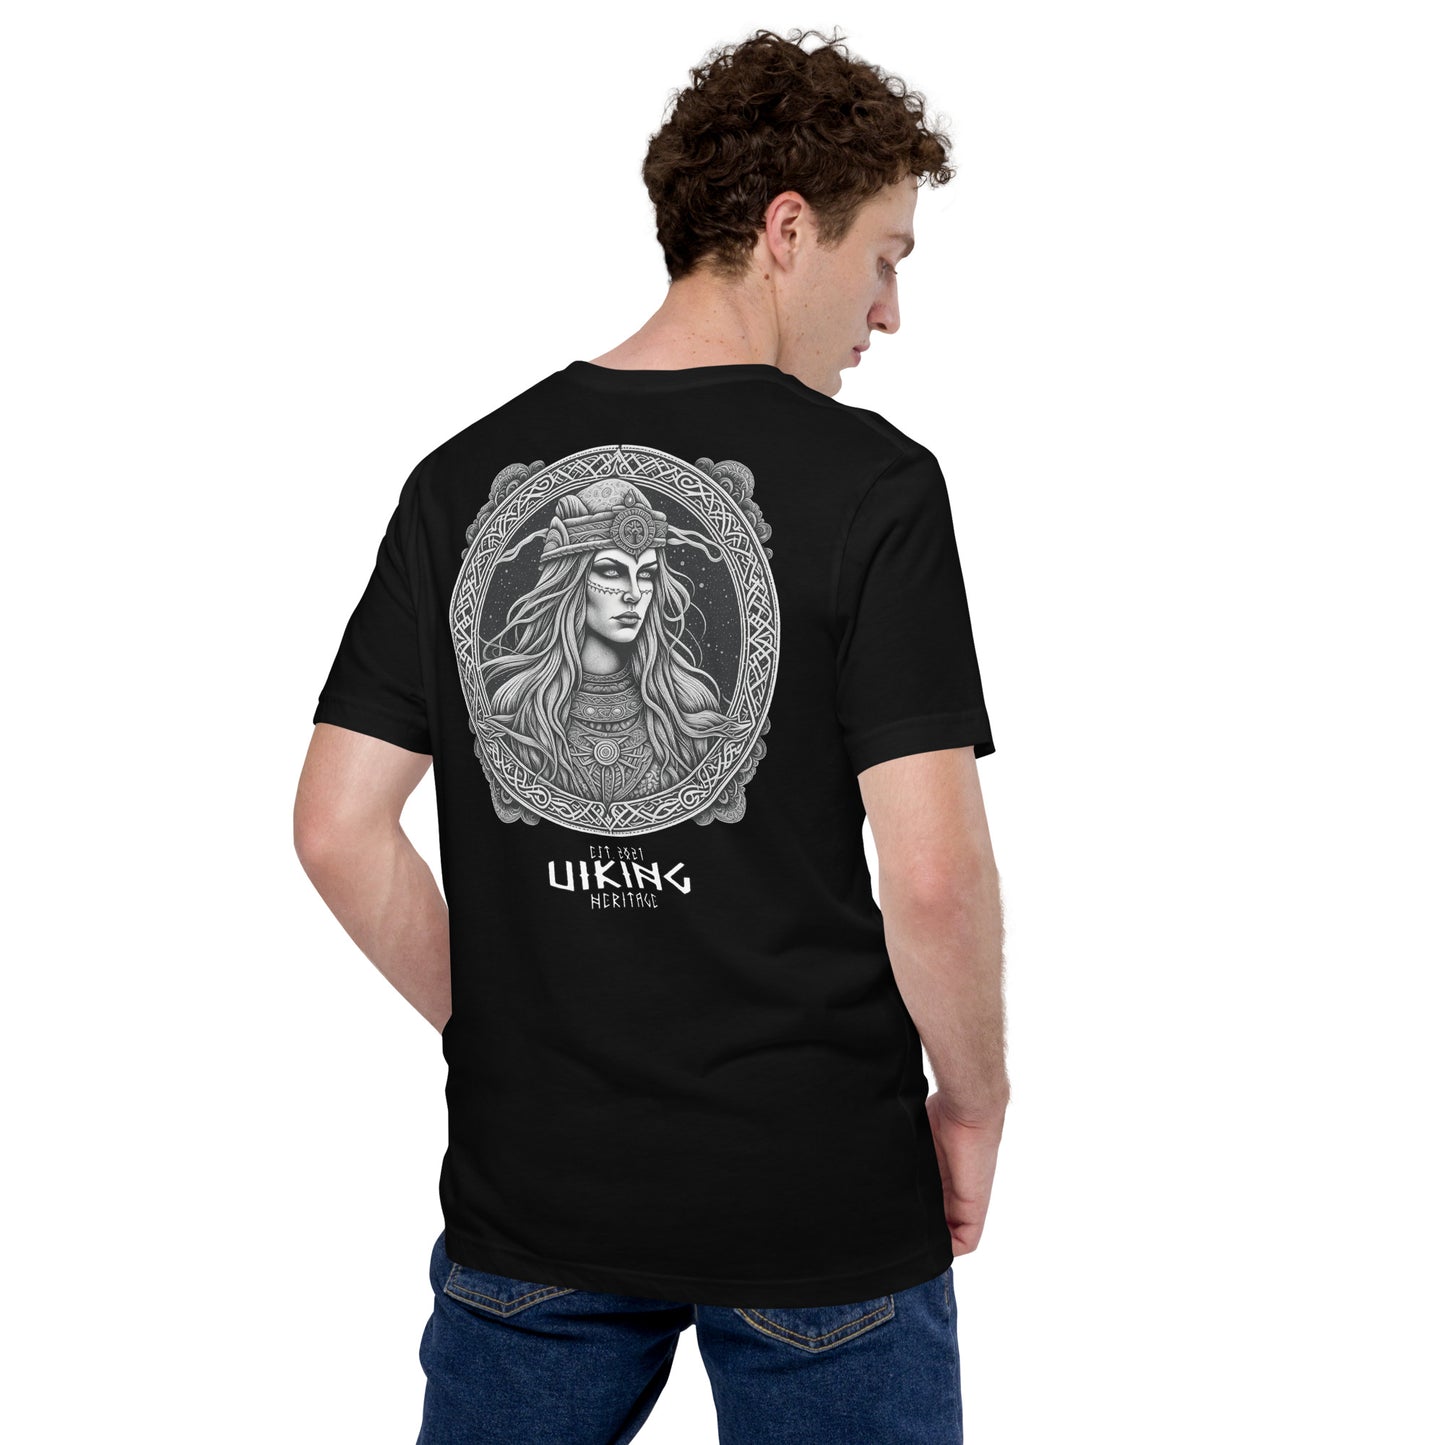 Norse Witch Viking Heritage T-Shirt